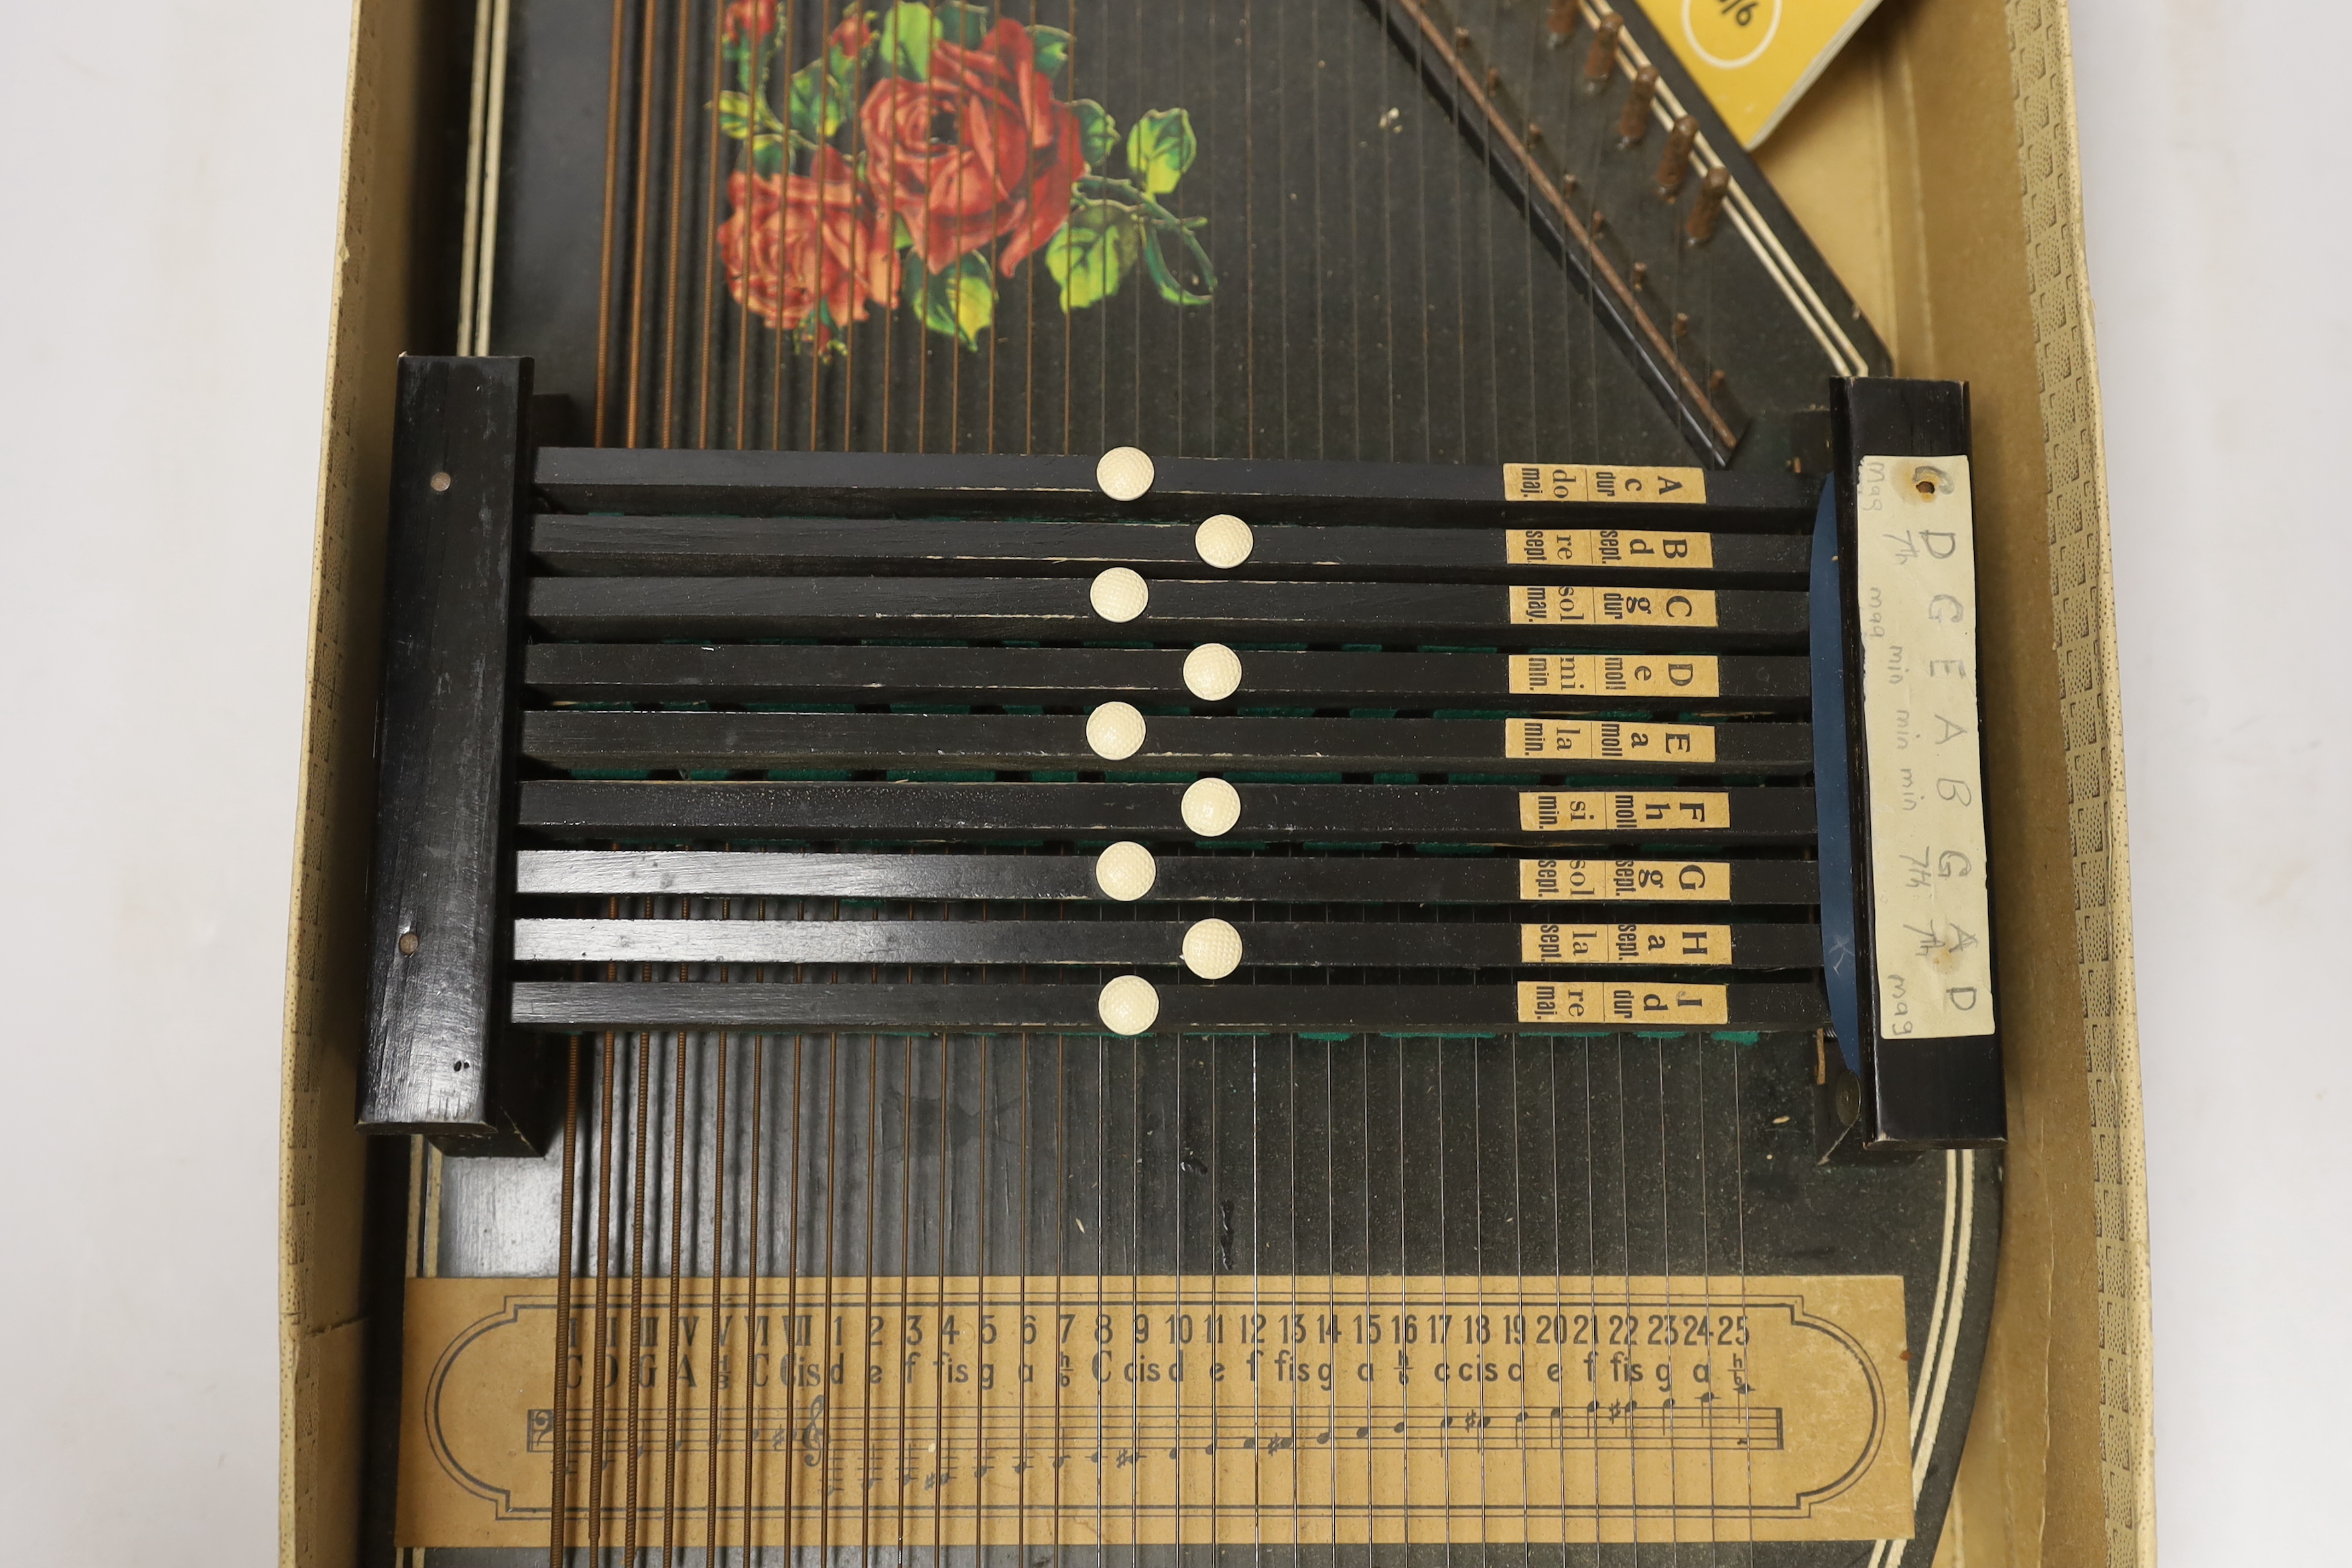 An autoharp in original box with booklet